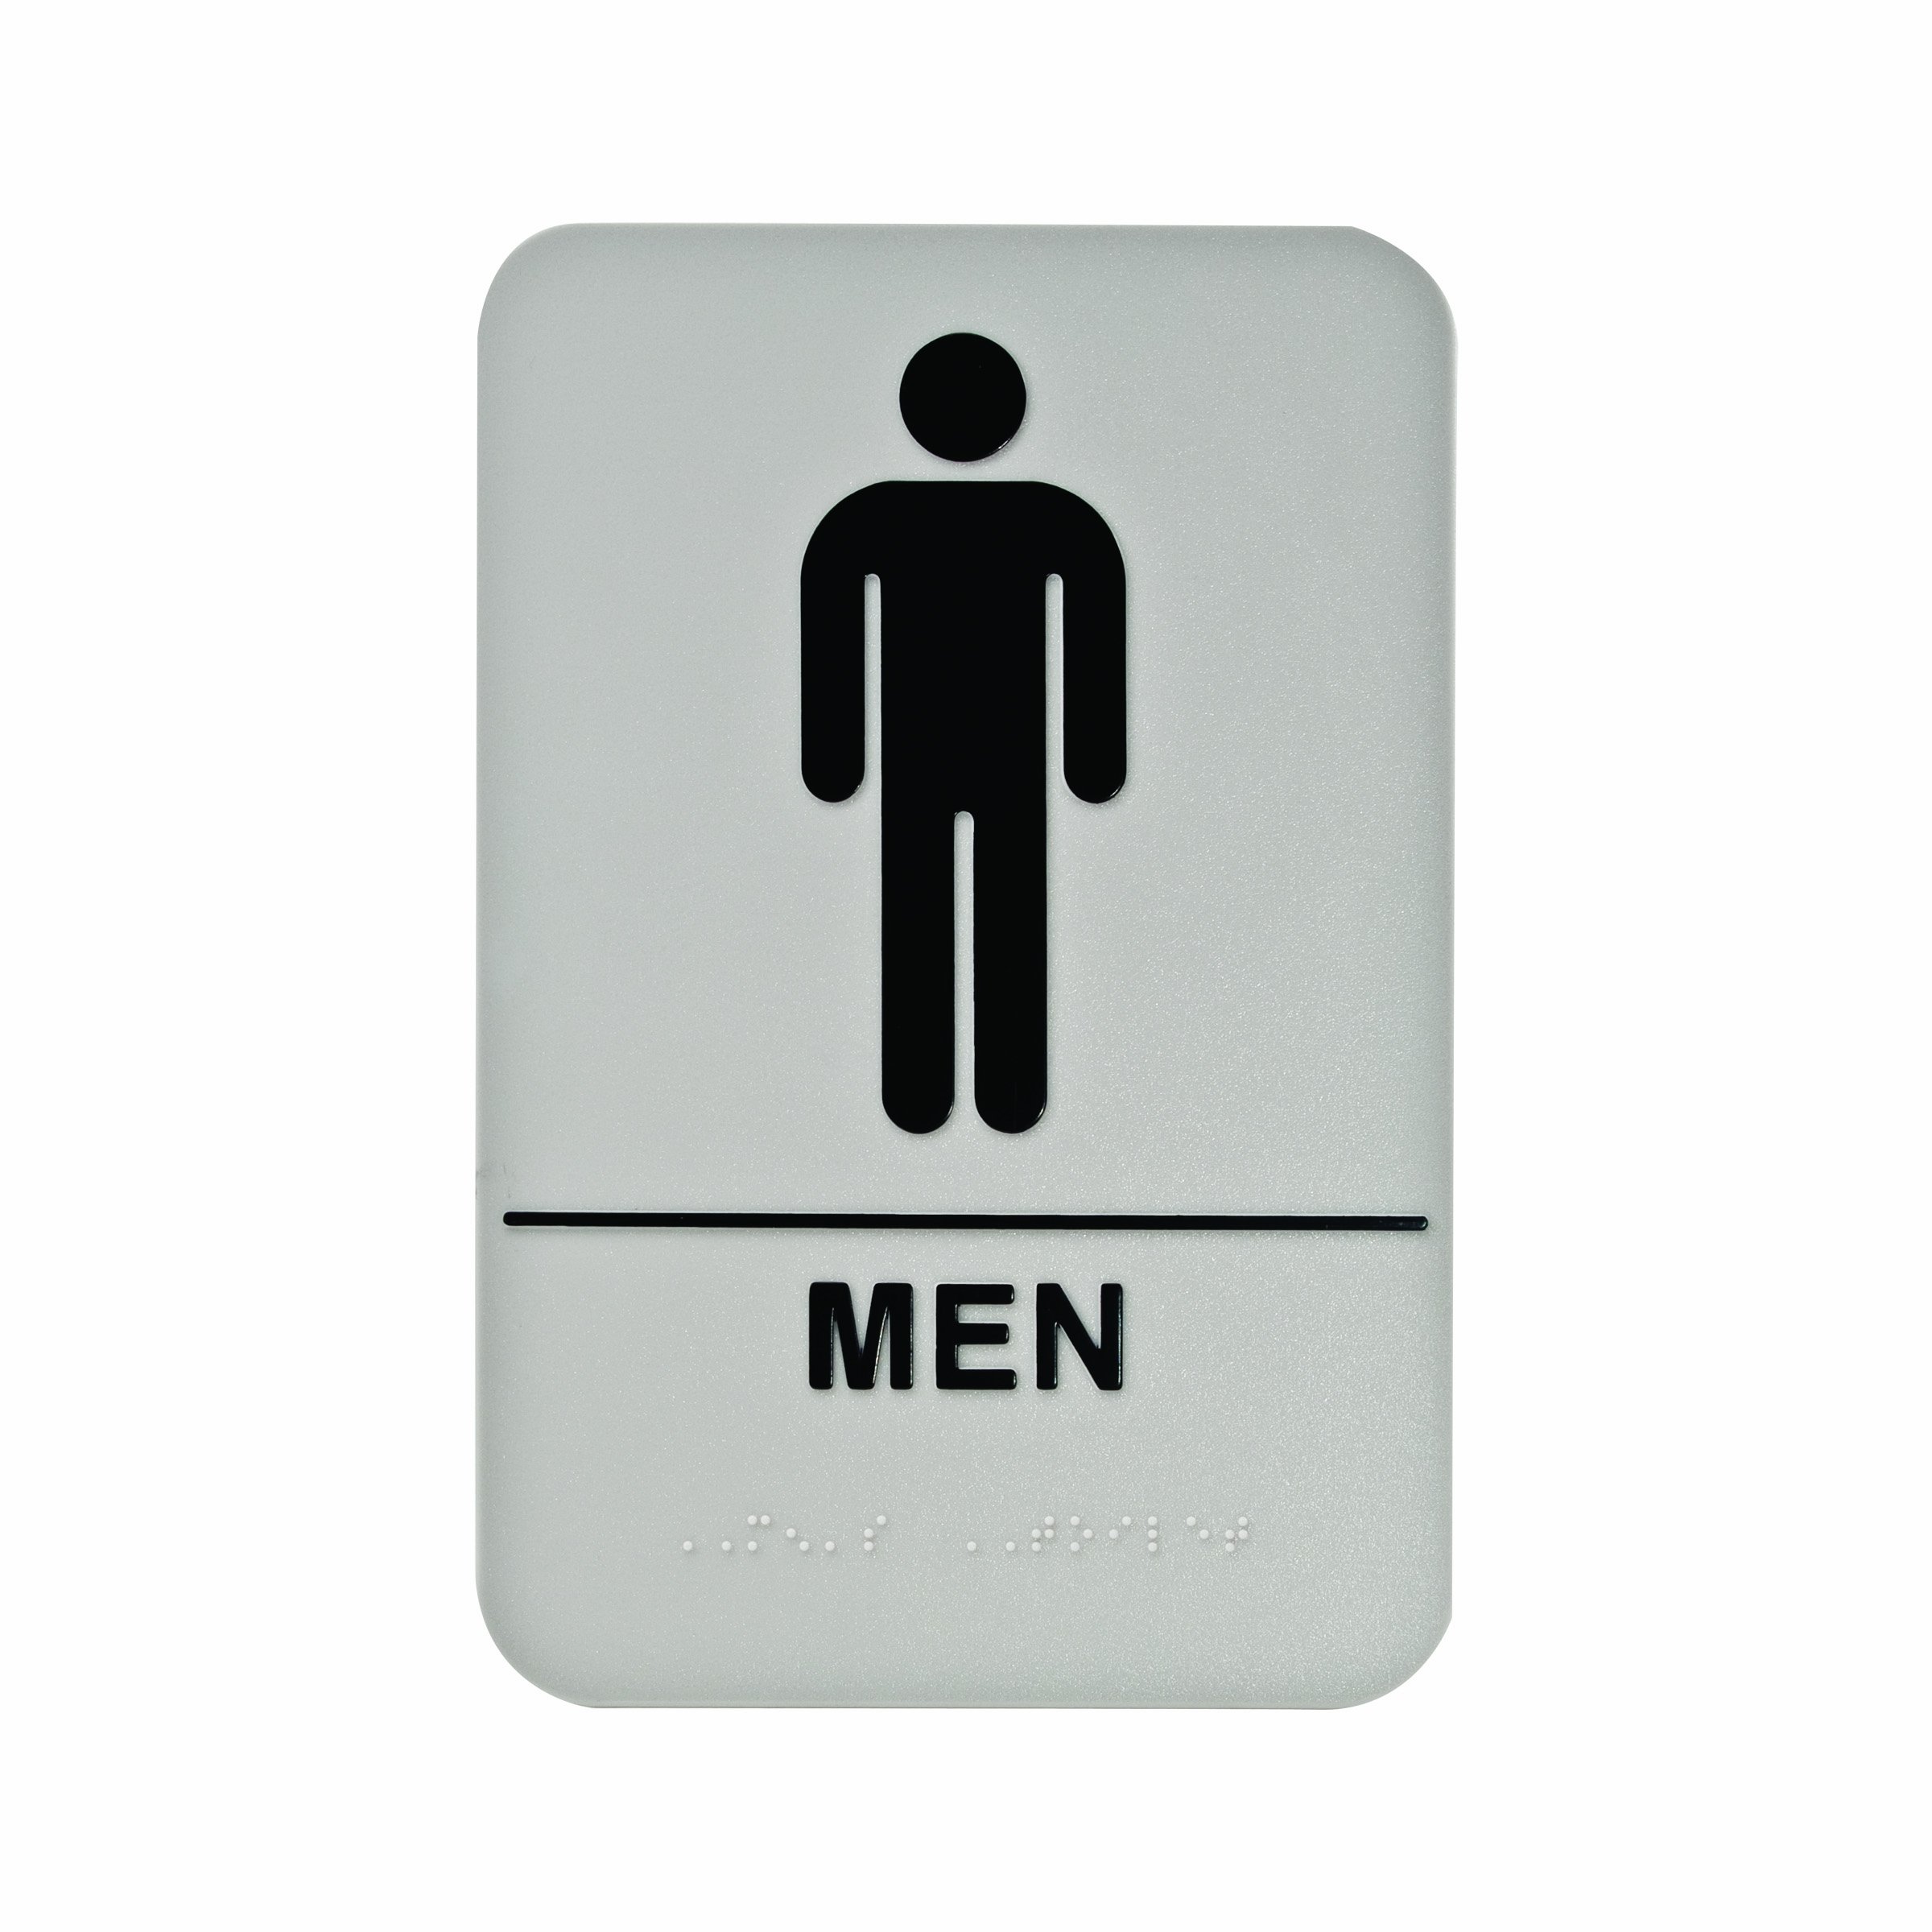 Mens Restroom Sign Images & Pictures - Becuo